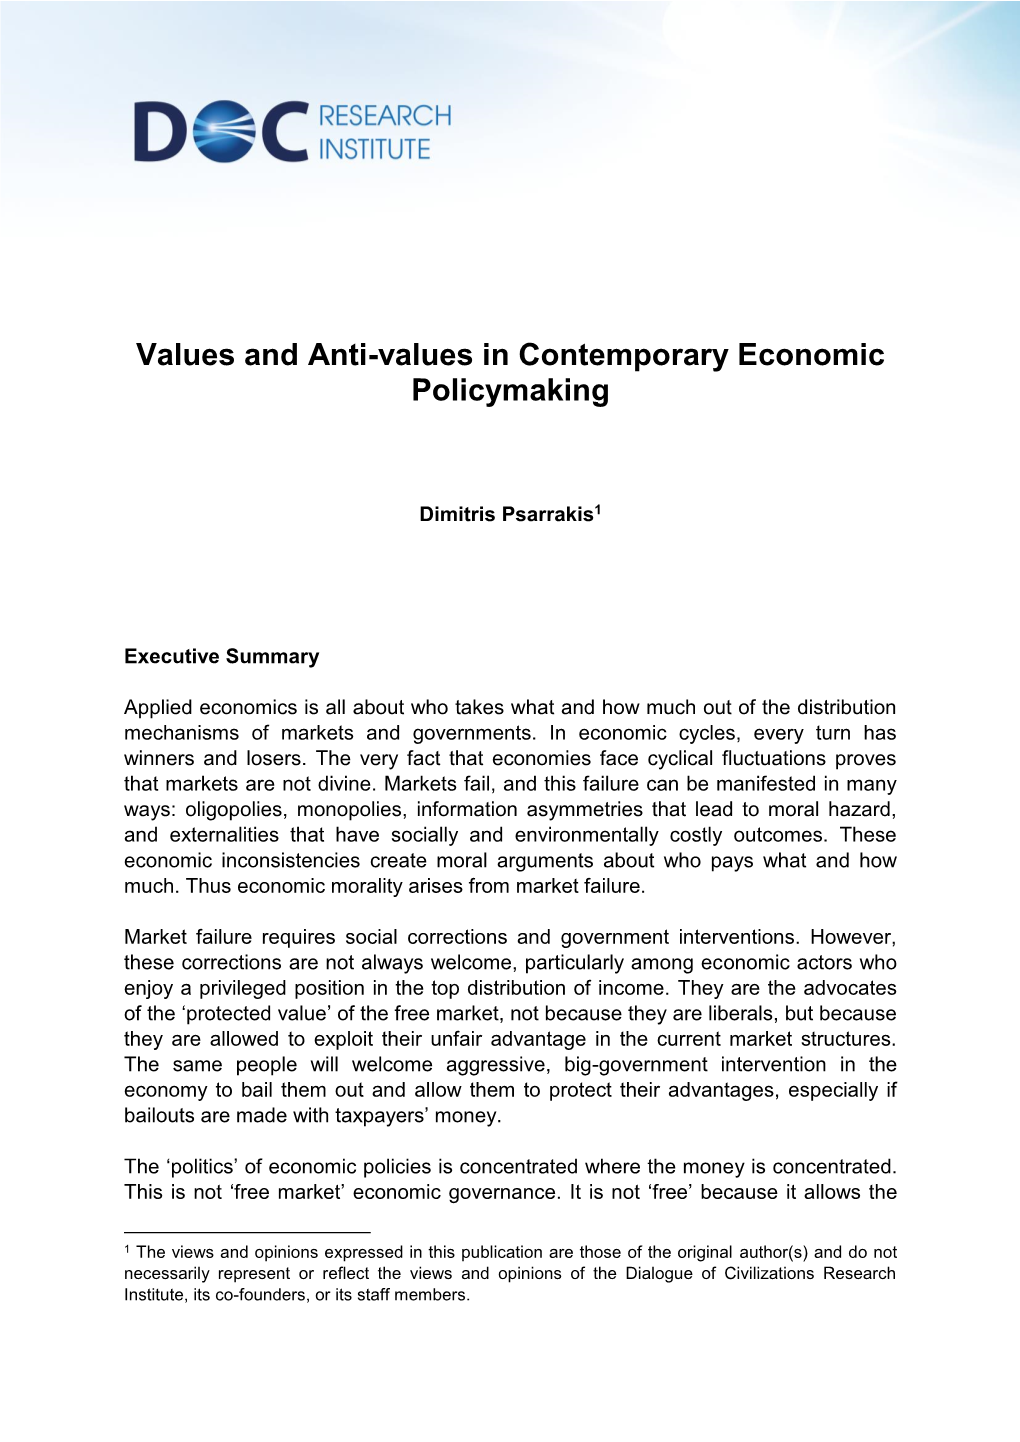 Values and Anti-Values in Contemporary Economic Policymaking